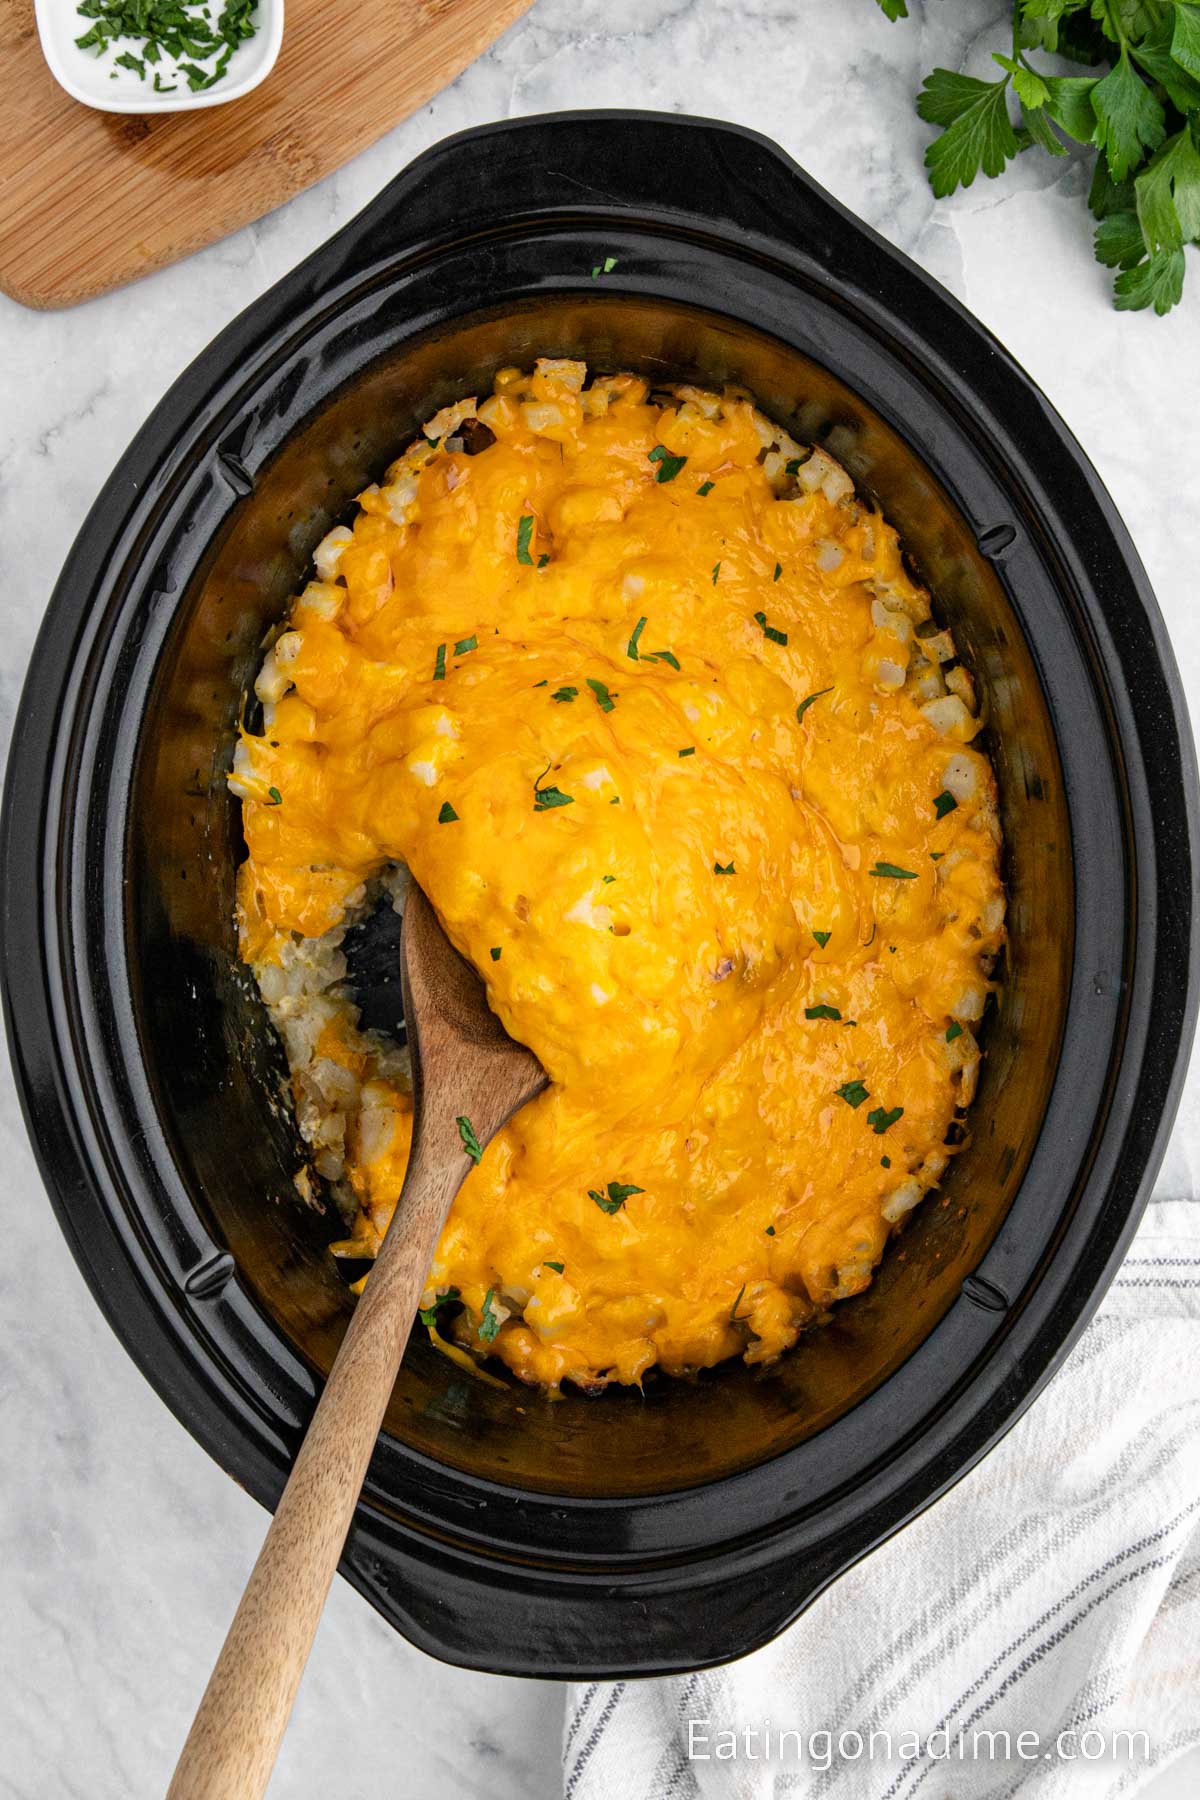 Funeral potatoes in the crock pot with a wooden spoon